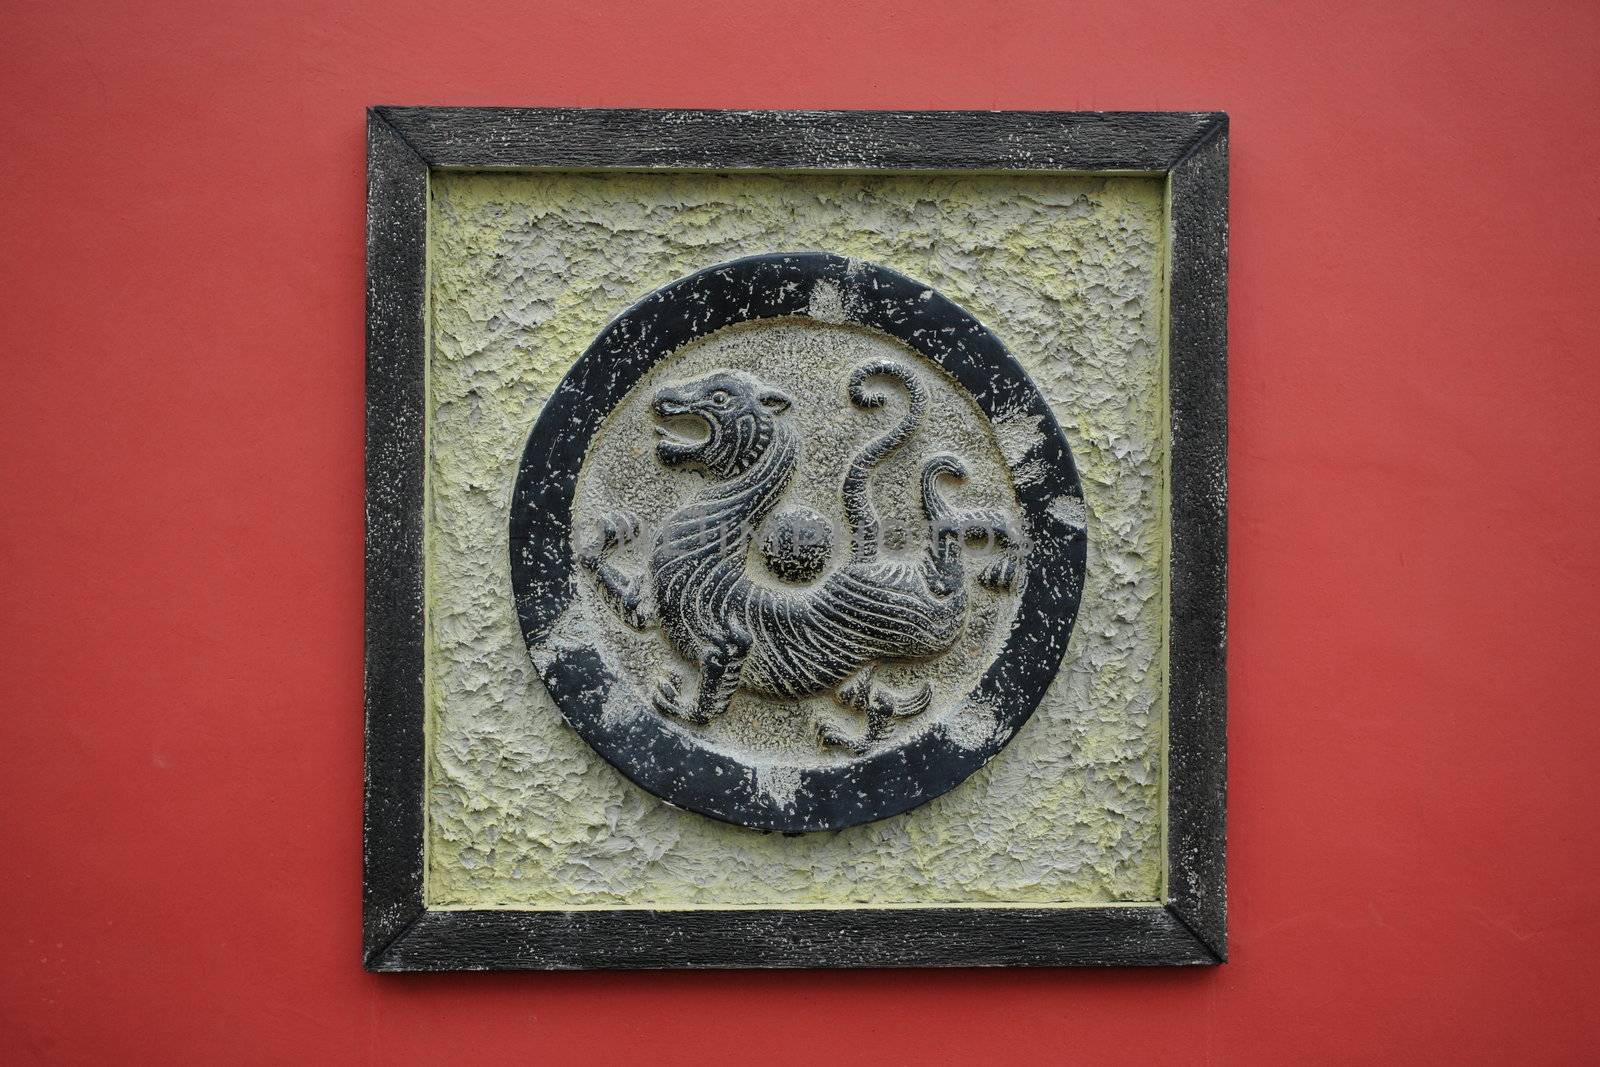 bronze tiger sculpture on a red wall